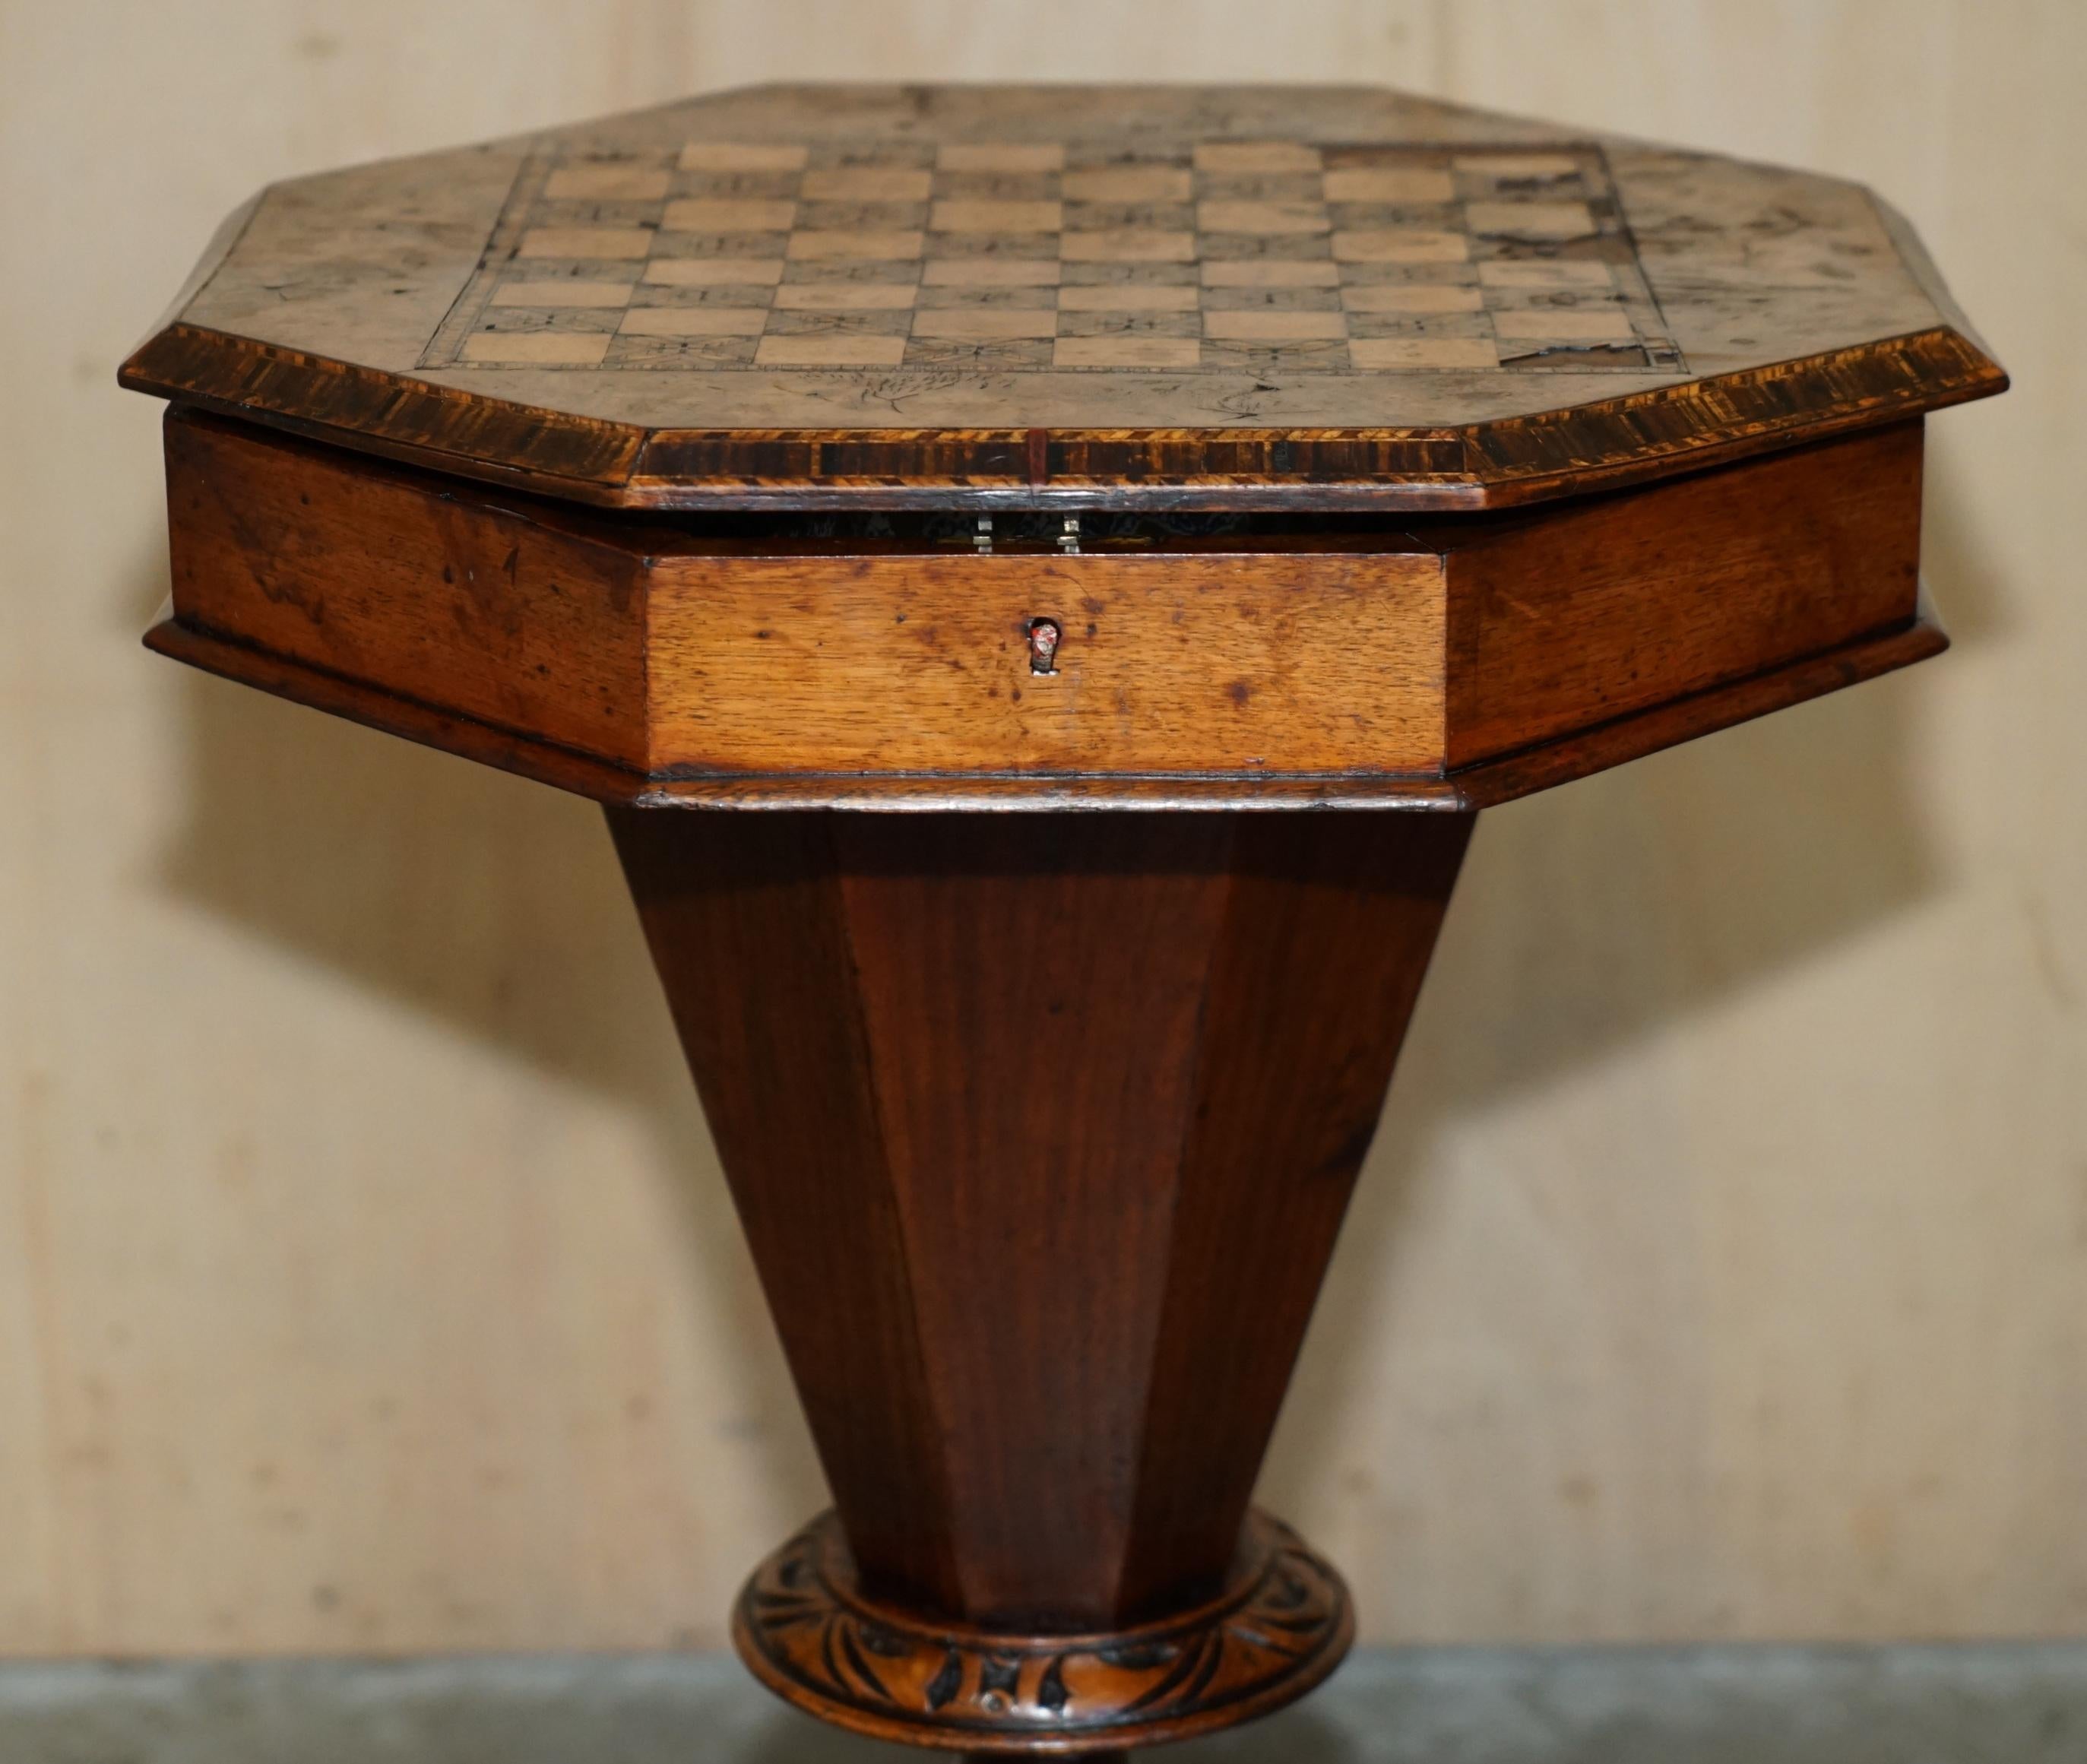 DISTRESsed ANTIQUE BURR WALNUT & HARDWOOD SEWiNG WORK TABLE CHESS BOARD TOP im Angebot 1